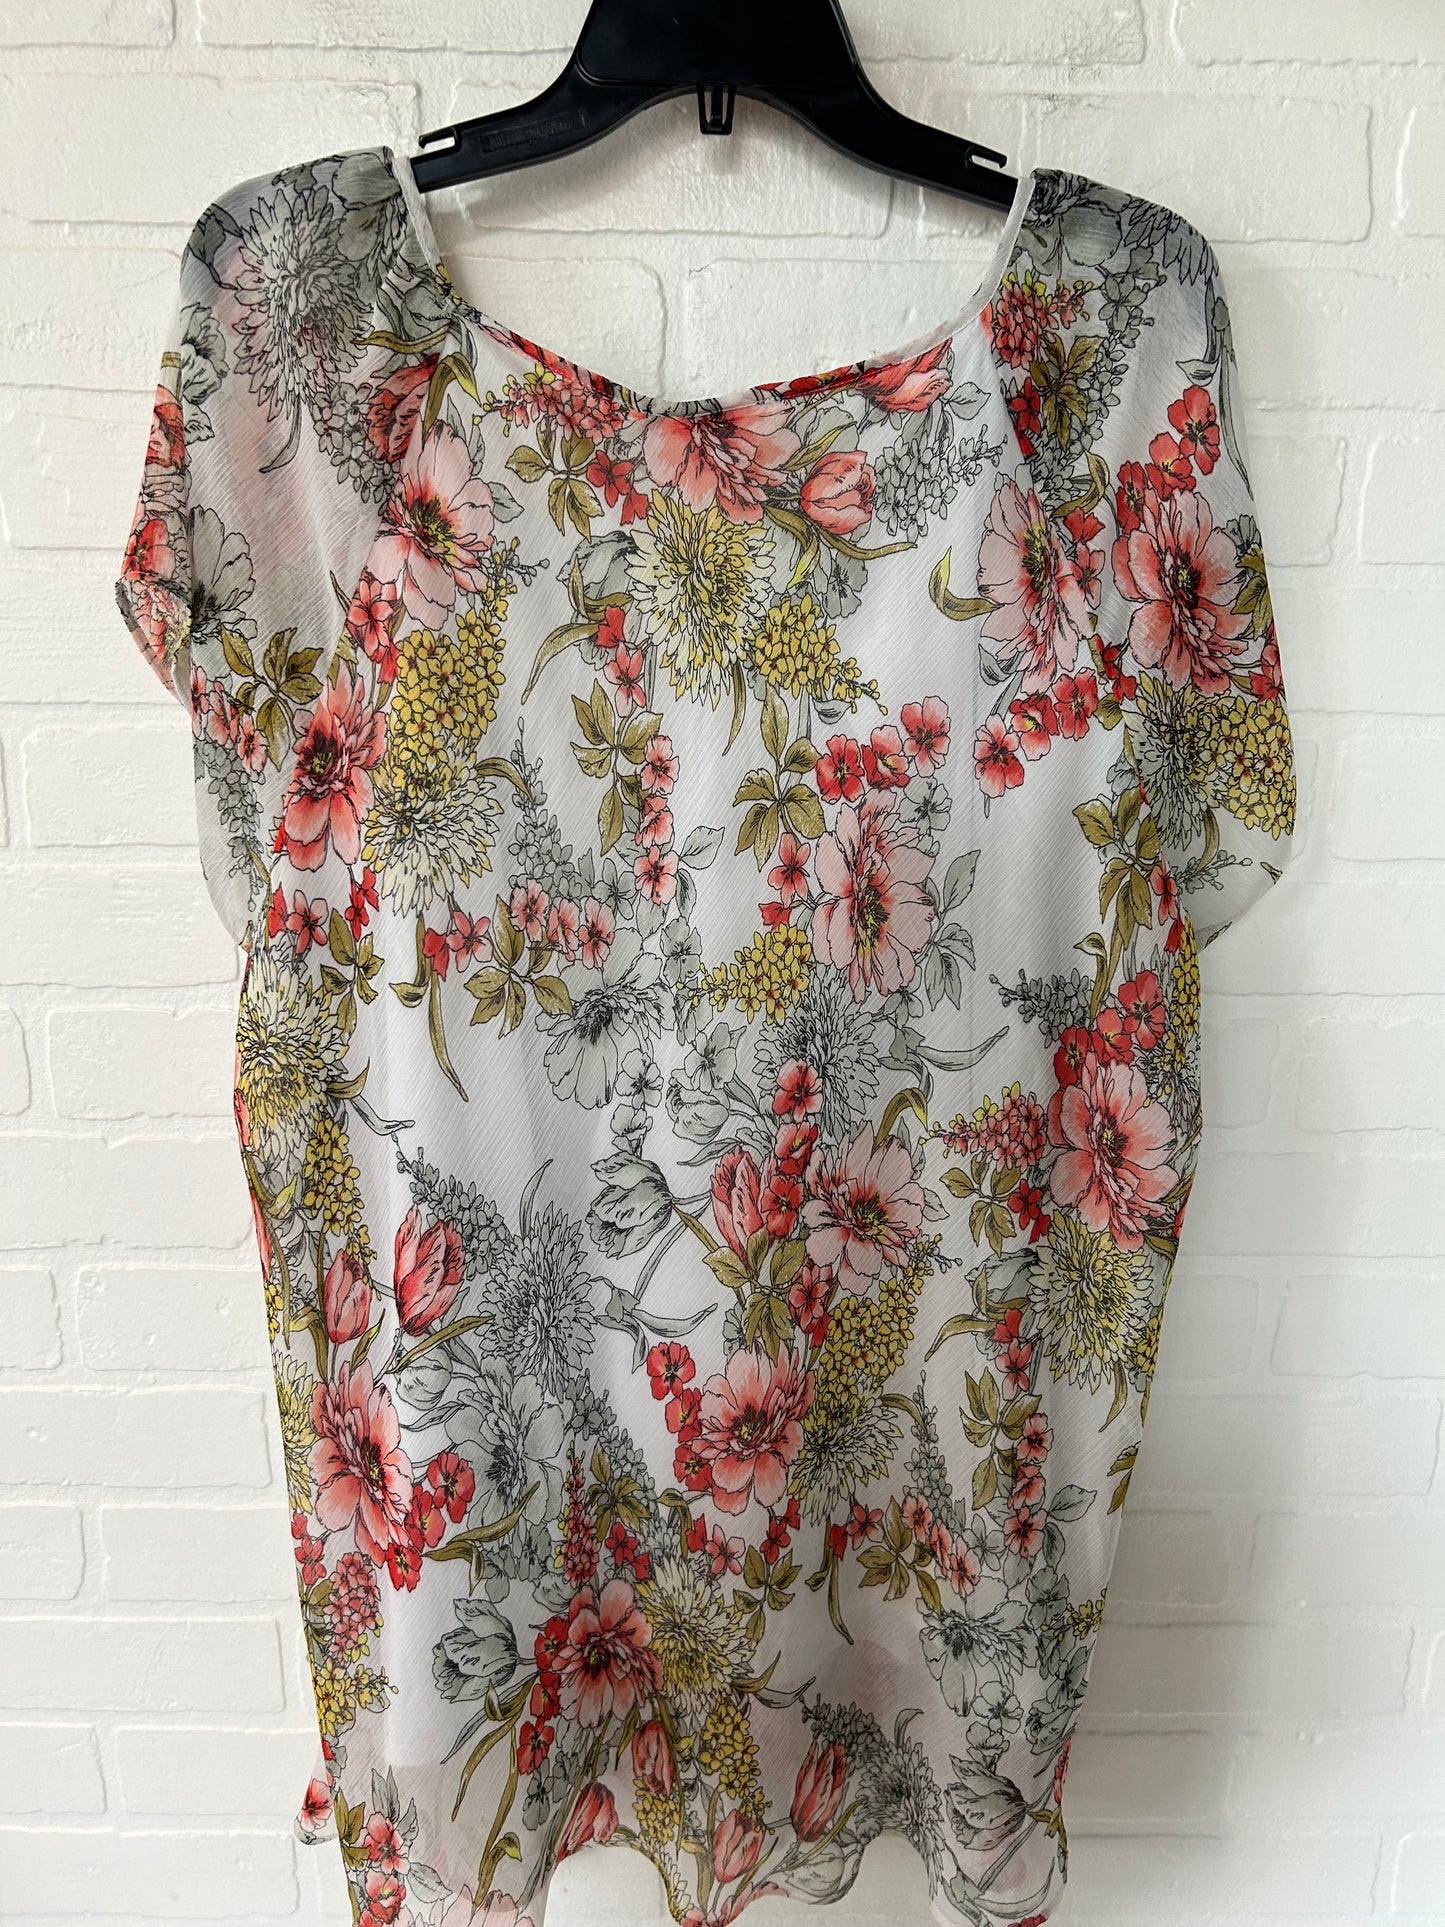 Floral Print Top Short Sleeve Roz And Ali, Size 3x